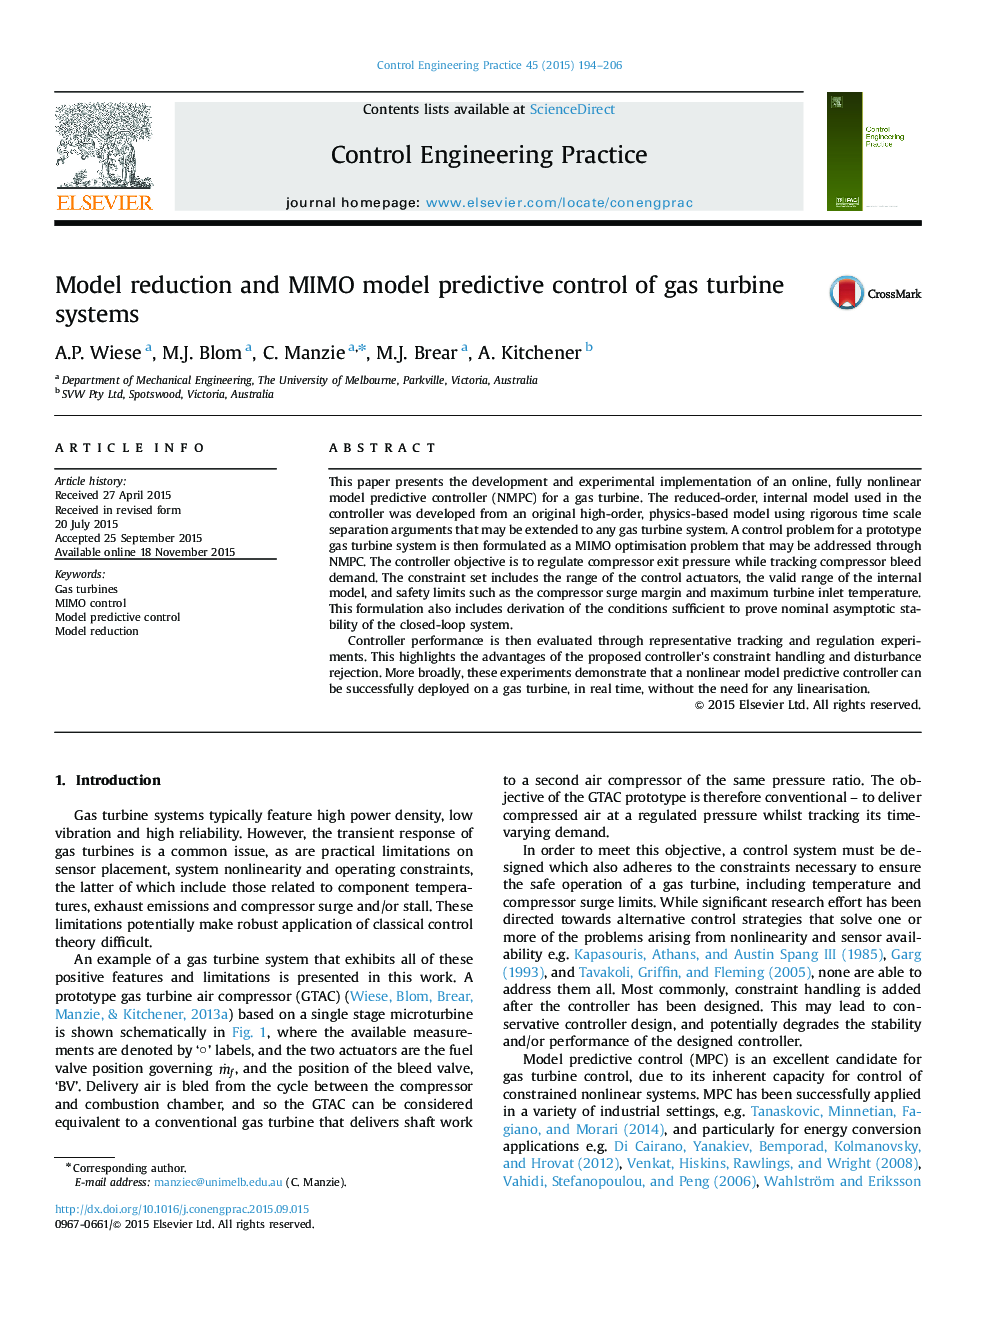 Model reduction and MIMO model predictive control of gas turbine systems